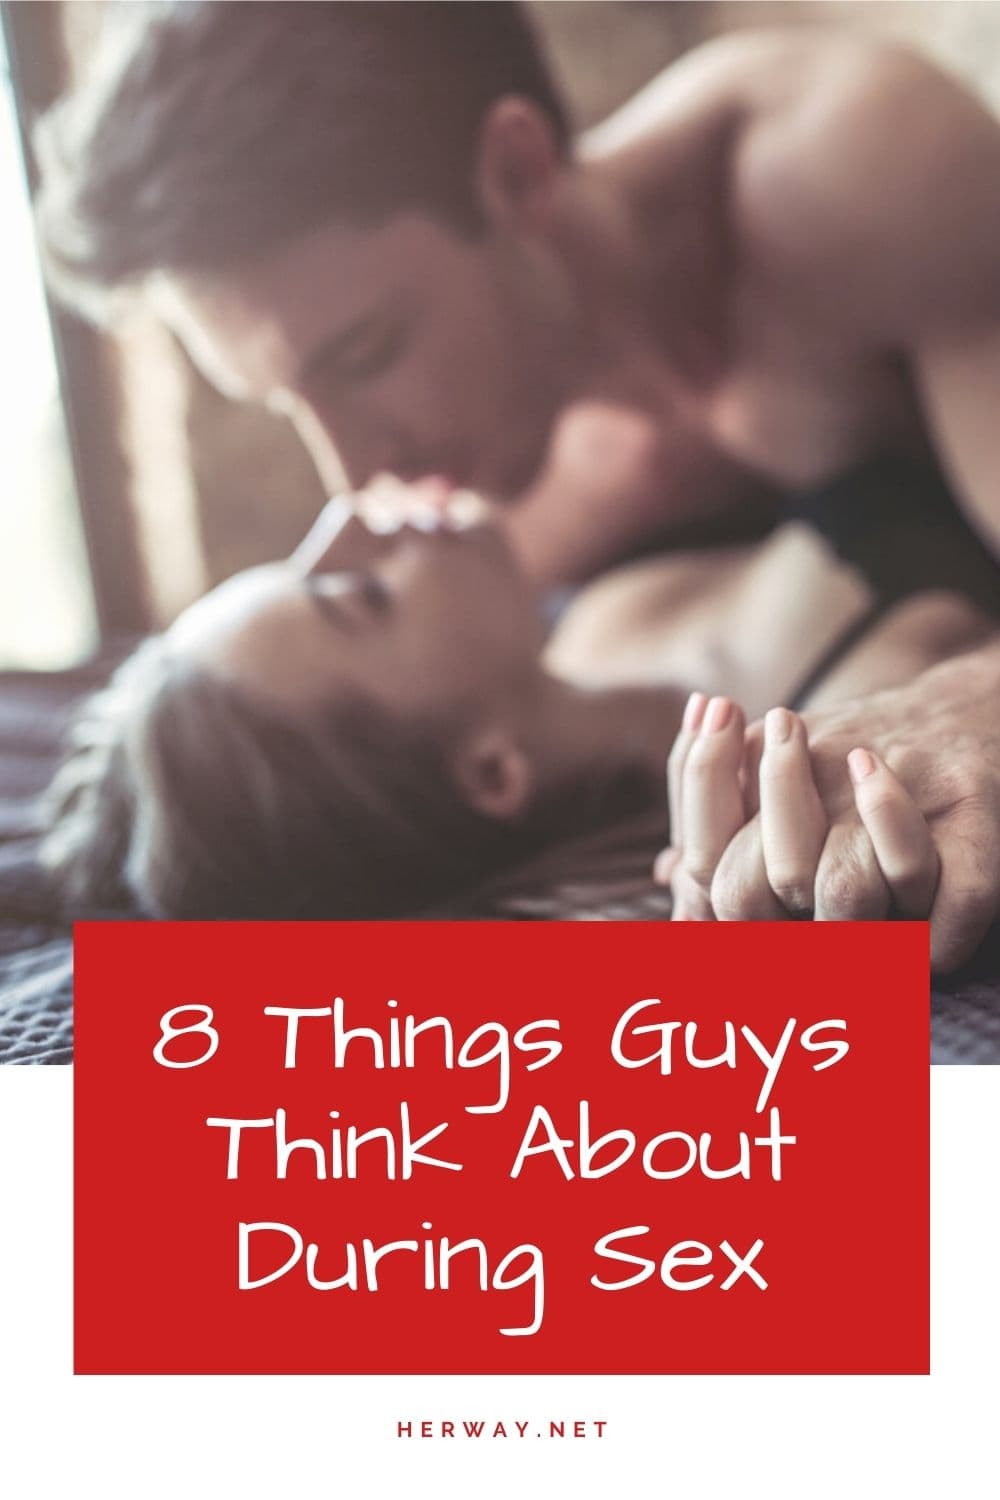 8 Things Guys Think About During Sex